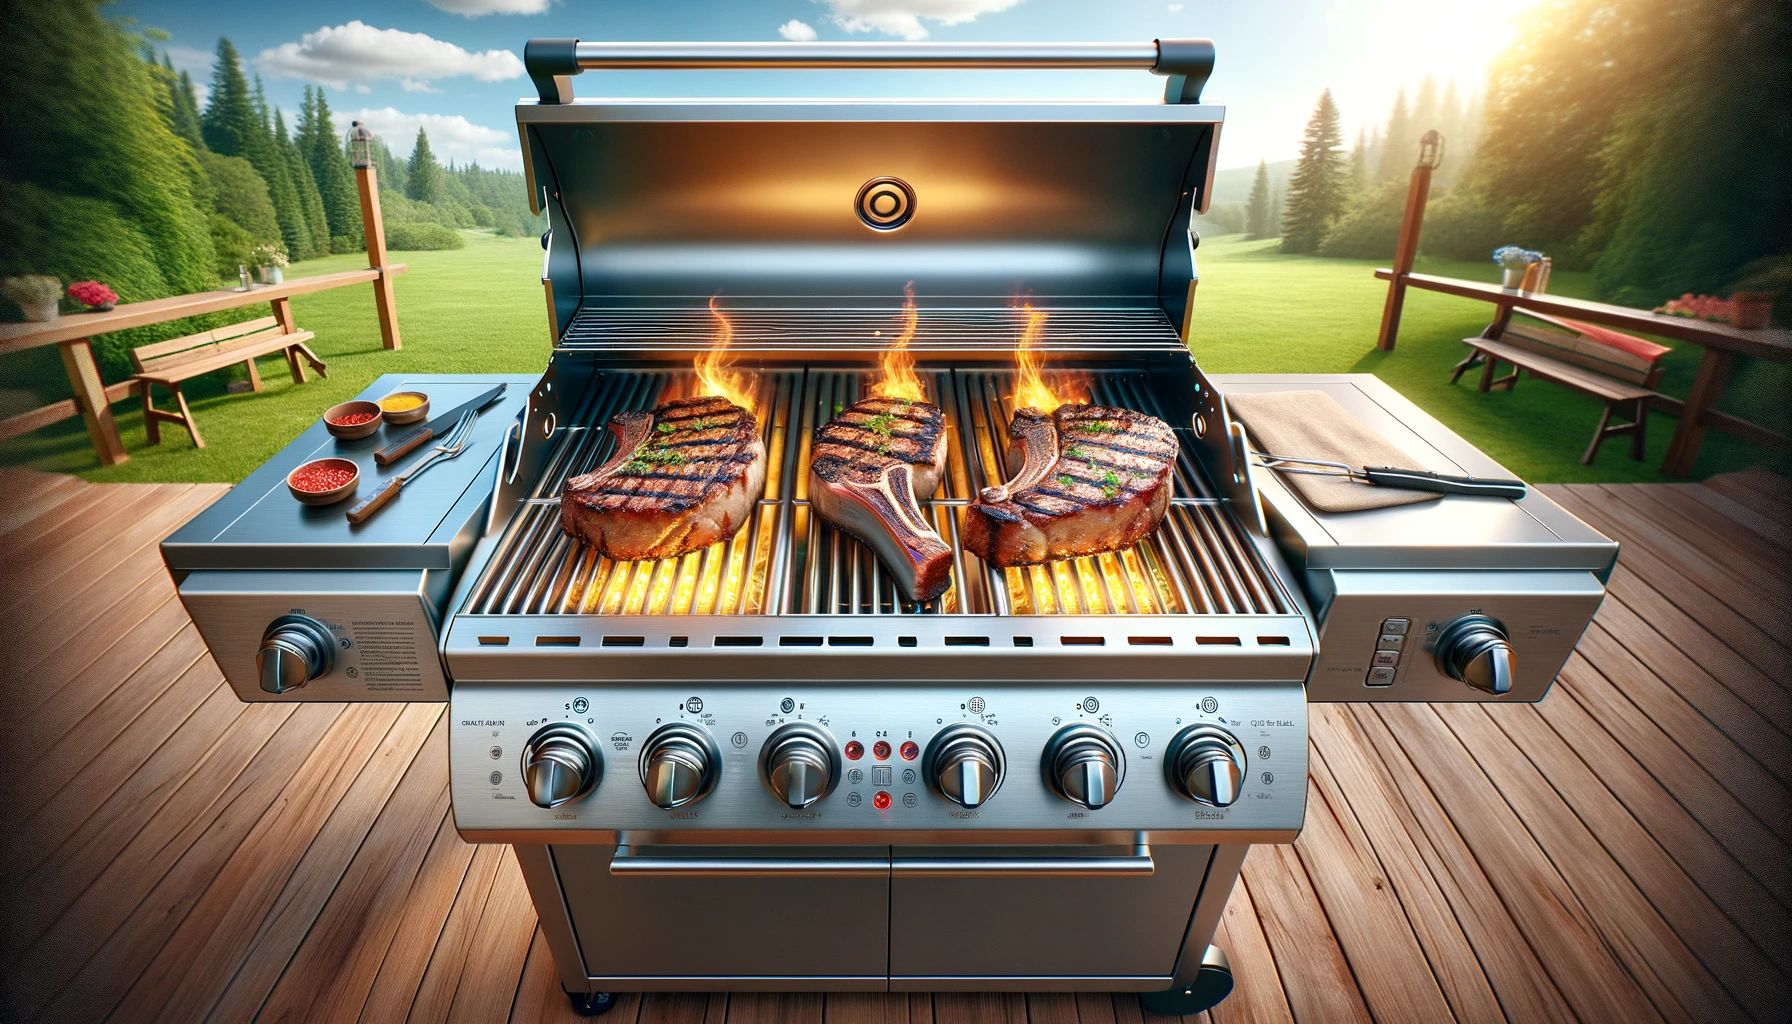 Tips for how to get the most out of your summer grilling